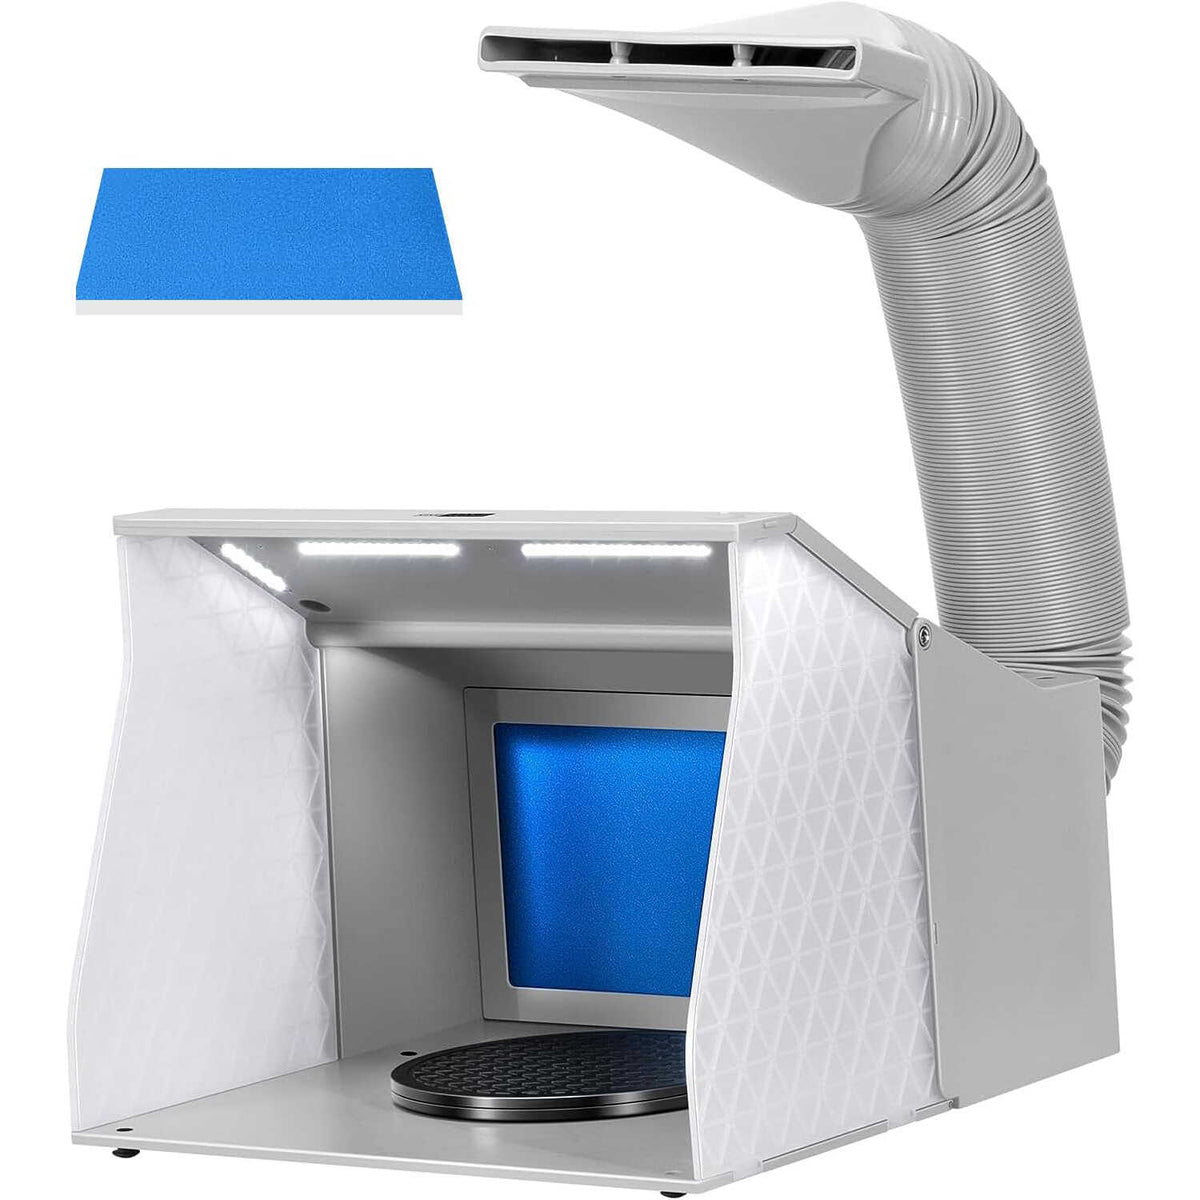 VIVOHOME Dual Fans Airbrush Paint Spray Booth with 4 LED Lights Turn Table and Filter Hose